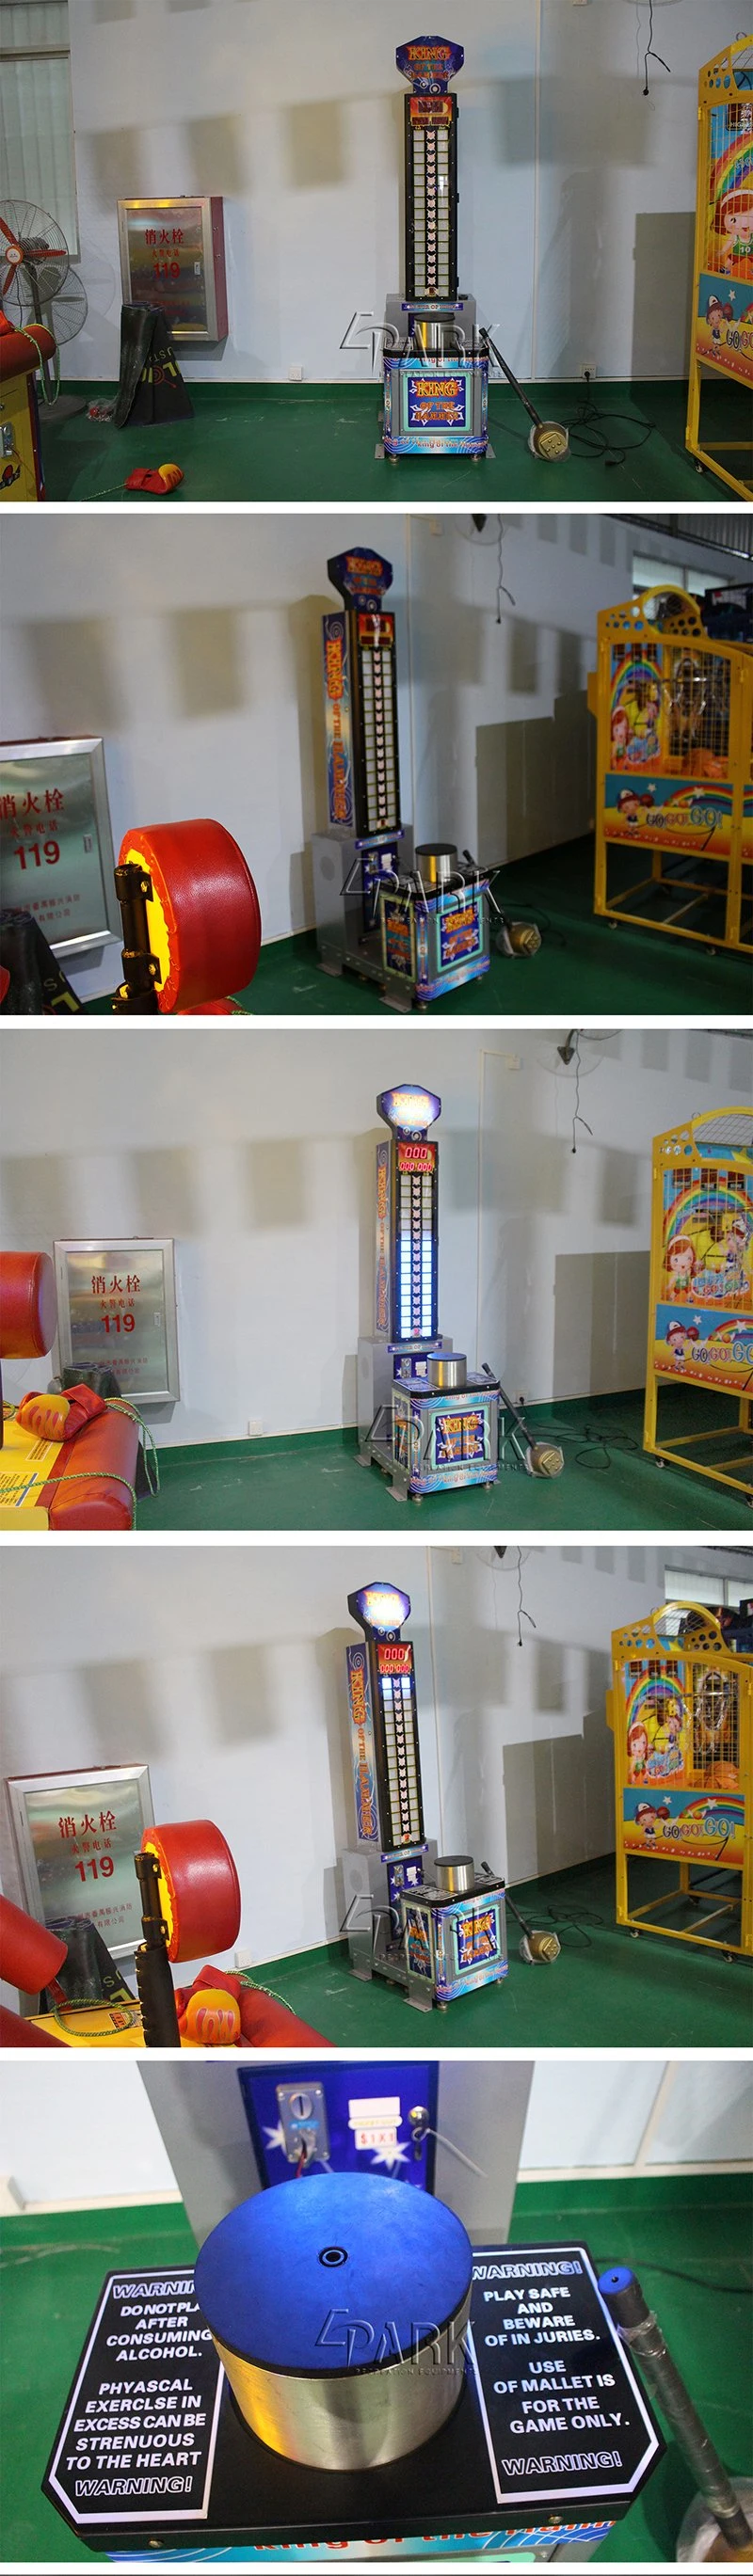 Automatic Strength Test Machine King of Hammer Boxing Arcade Hit Hammer Game Machine